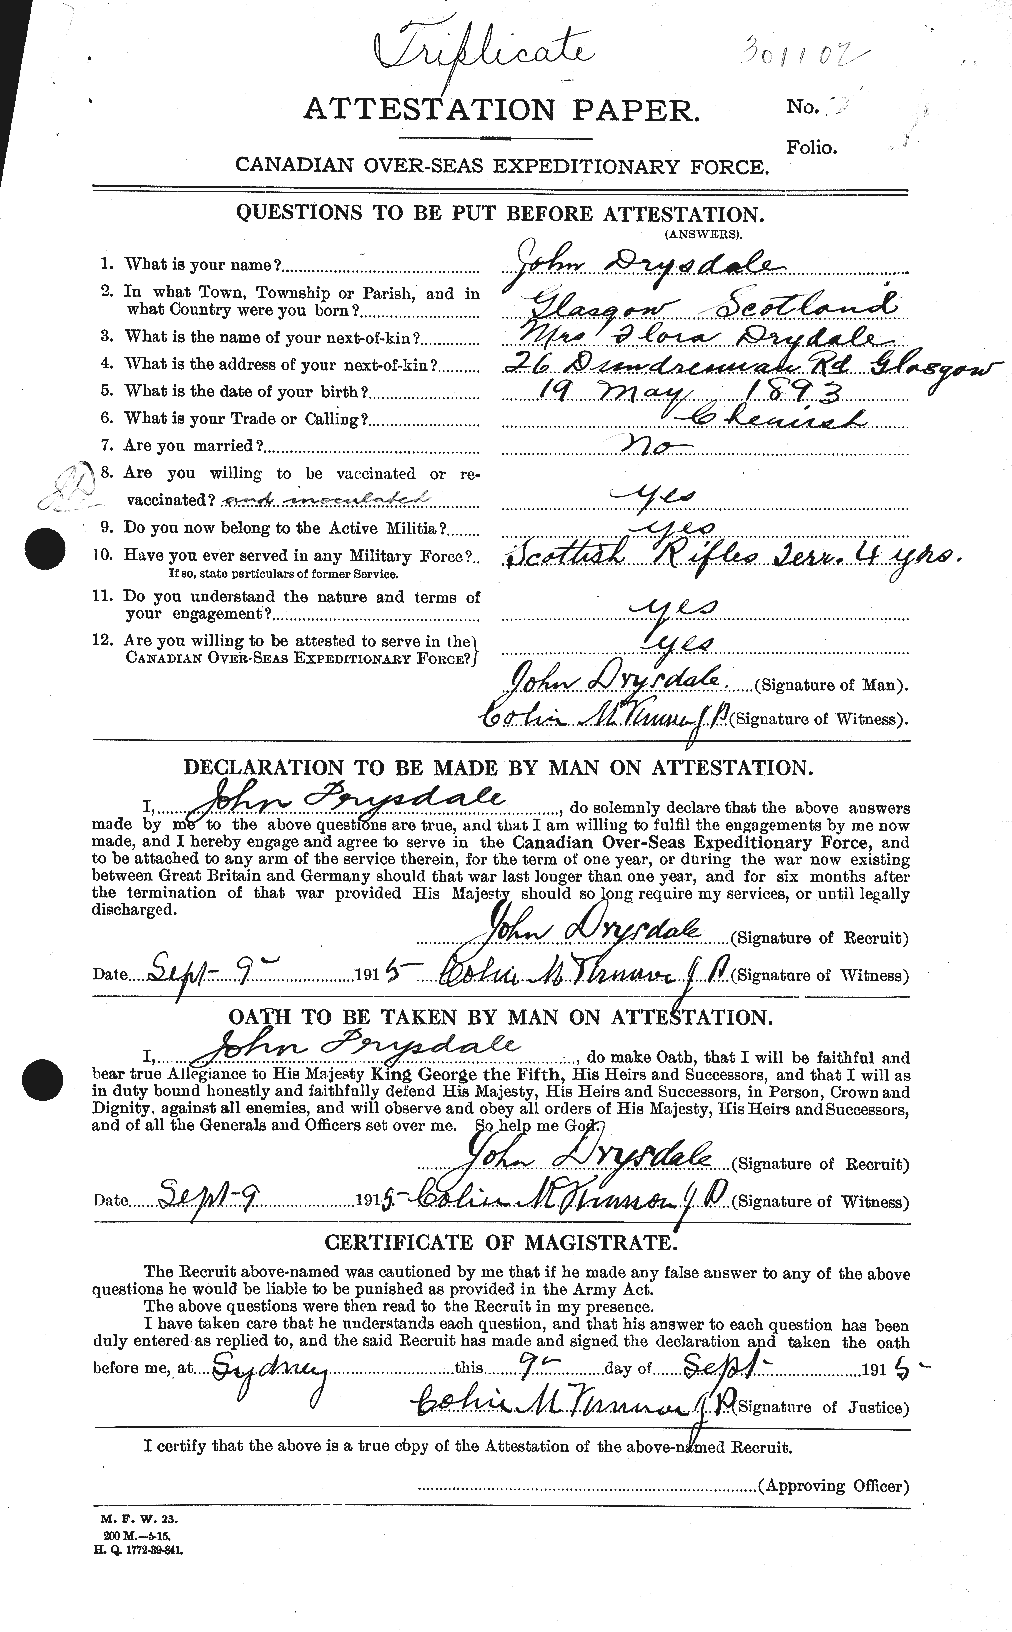 Personnel Records of the First World War - CEF 303187a